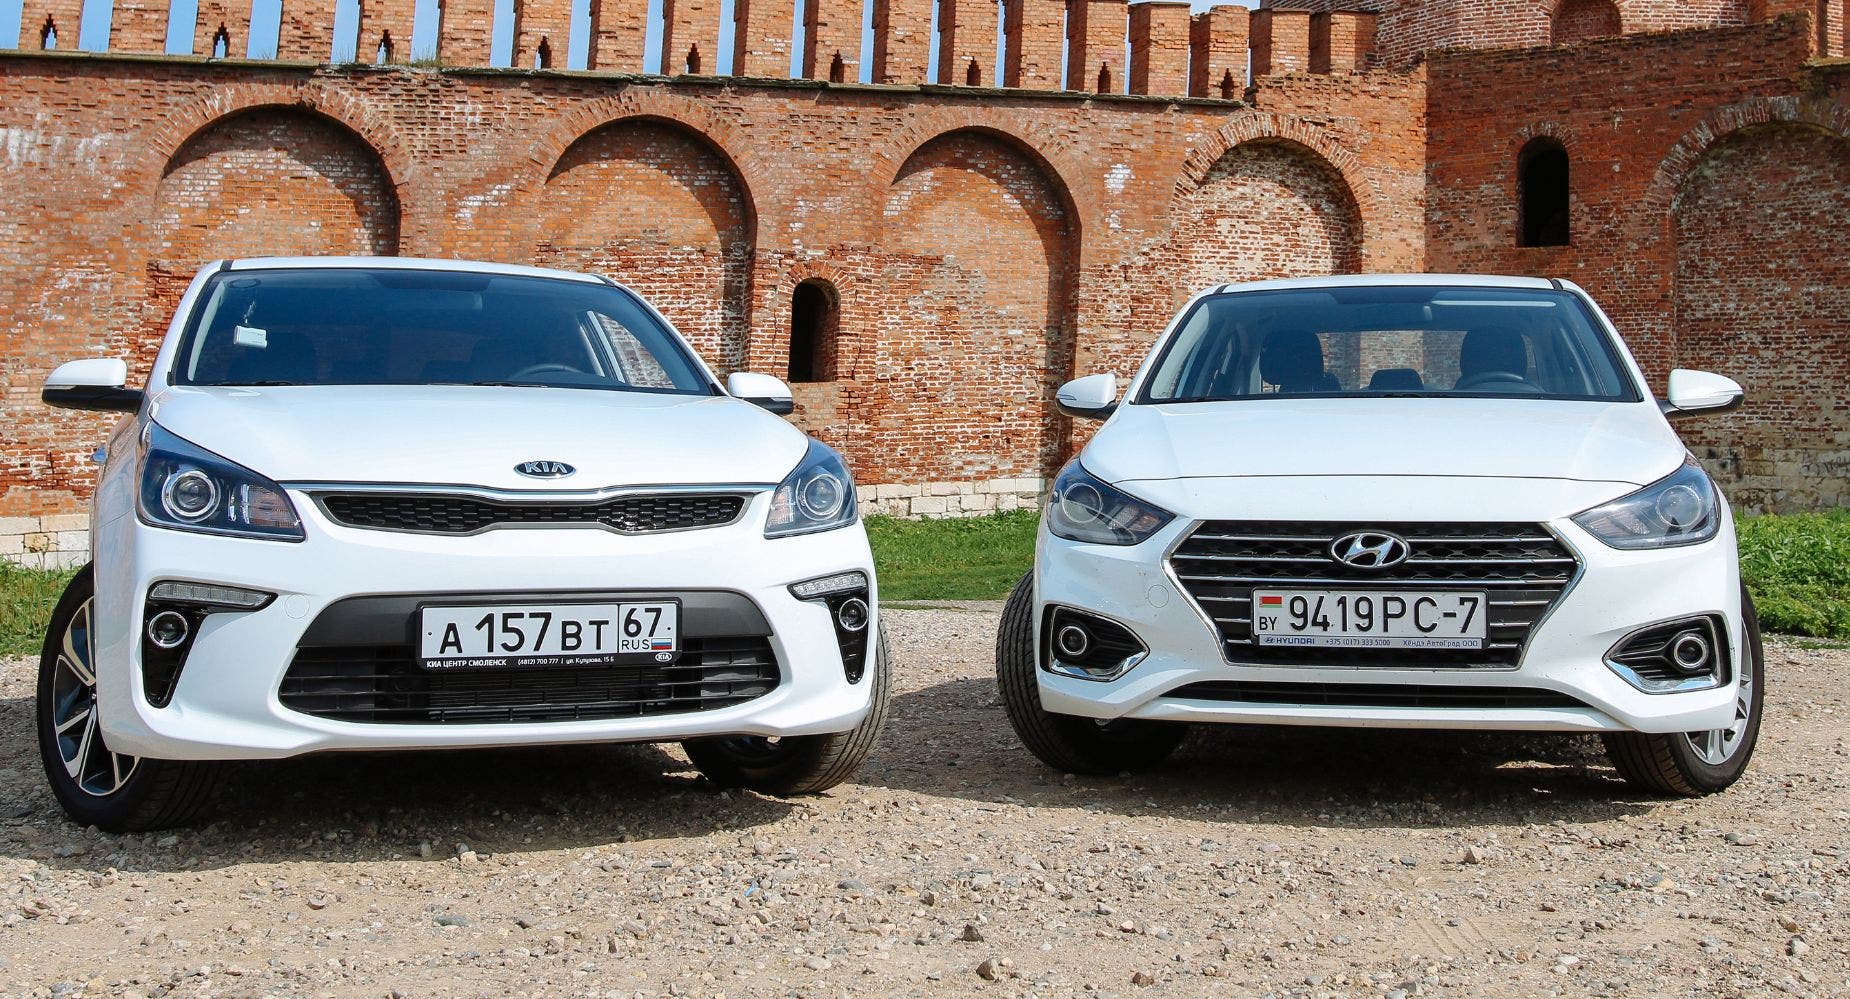 These 2 Auto Insurers Are Refusing To Cover Certain Models Made By Kia And Hyundai: Here's Why